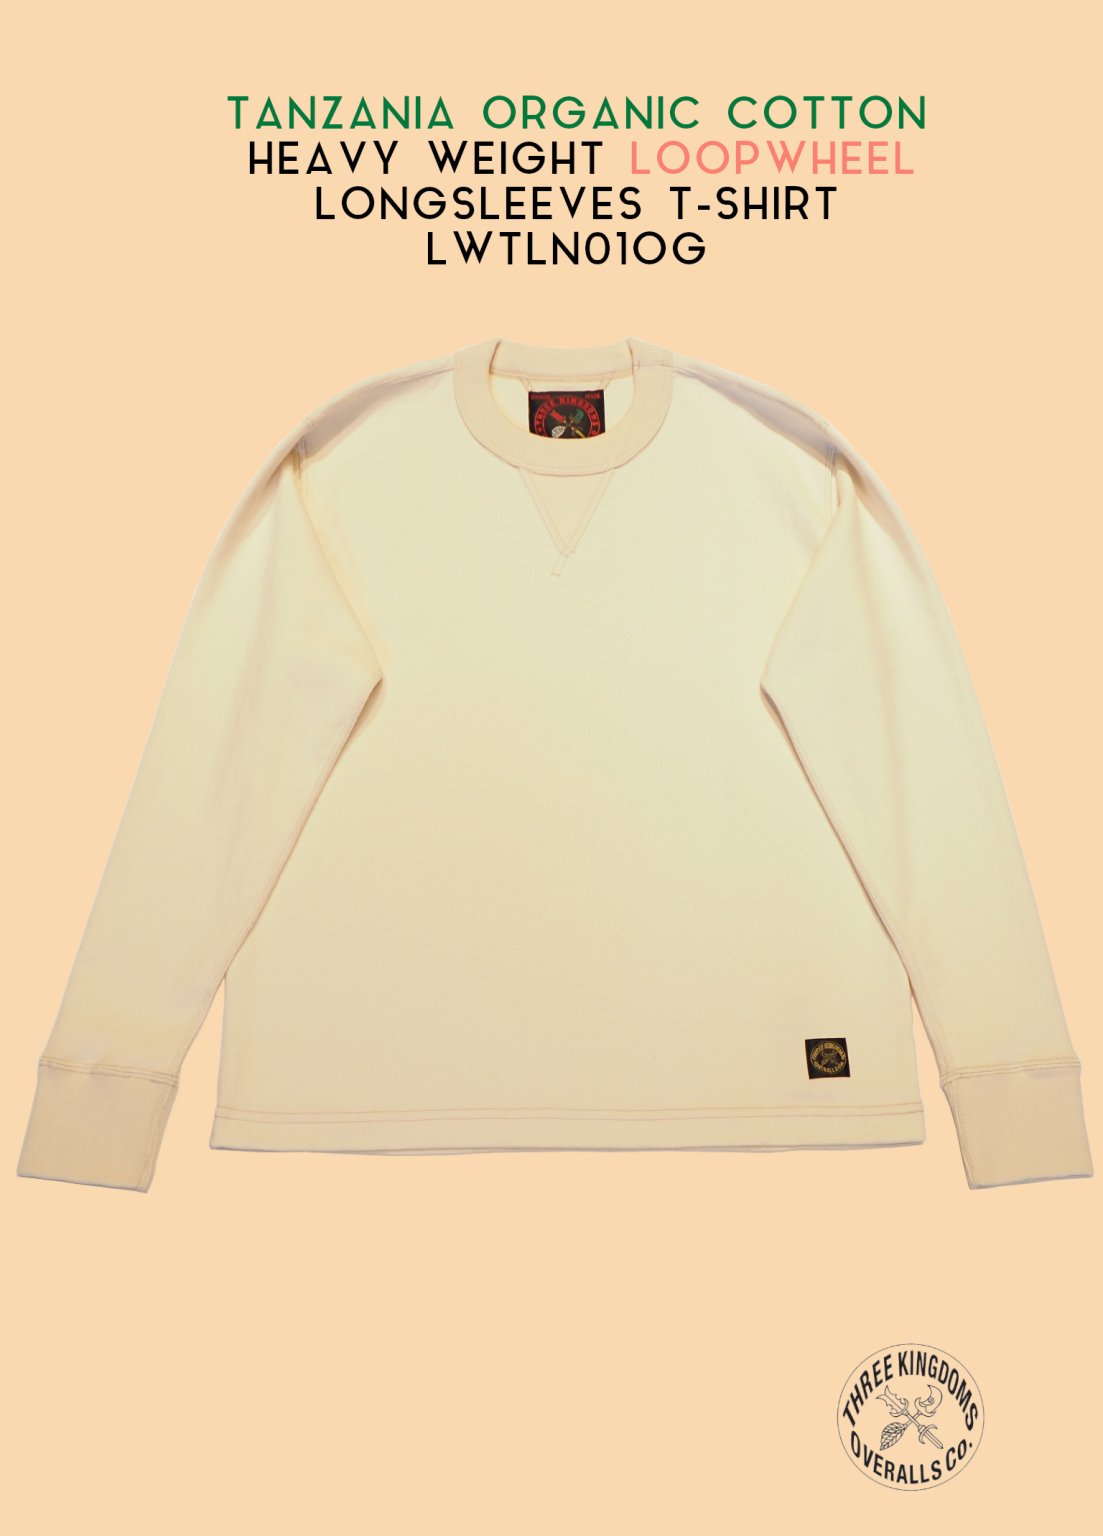 LWTLN01OG HEAVY WEIGHT LOOPWHEEL LONG SLEEVES  T-Shirt<img class='new_mark_img2' src='https://img.shop-pro.jp/img/new/icons14.gif' style='border:none;display:inline;margin:0px;padding:0px;width:auto;' />